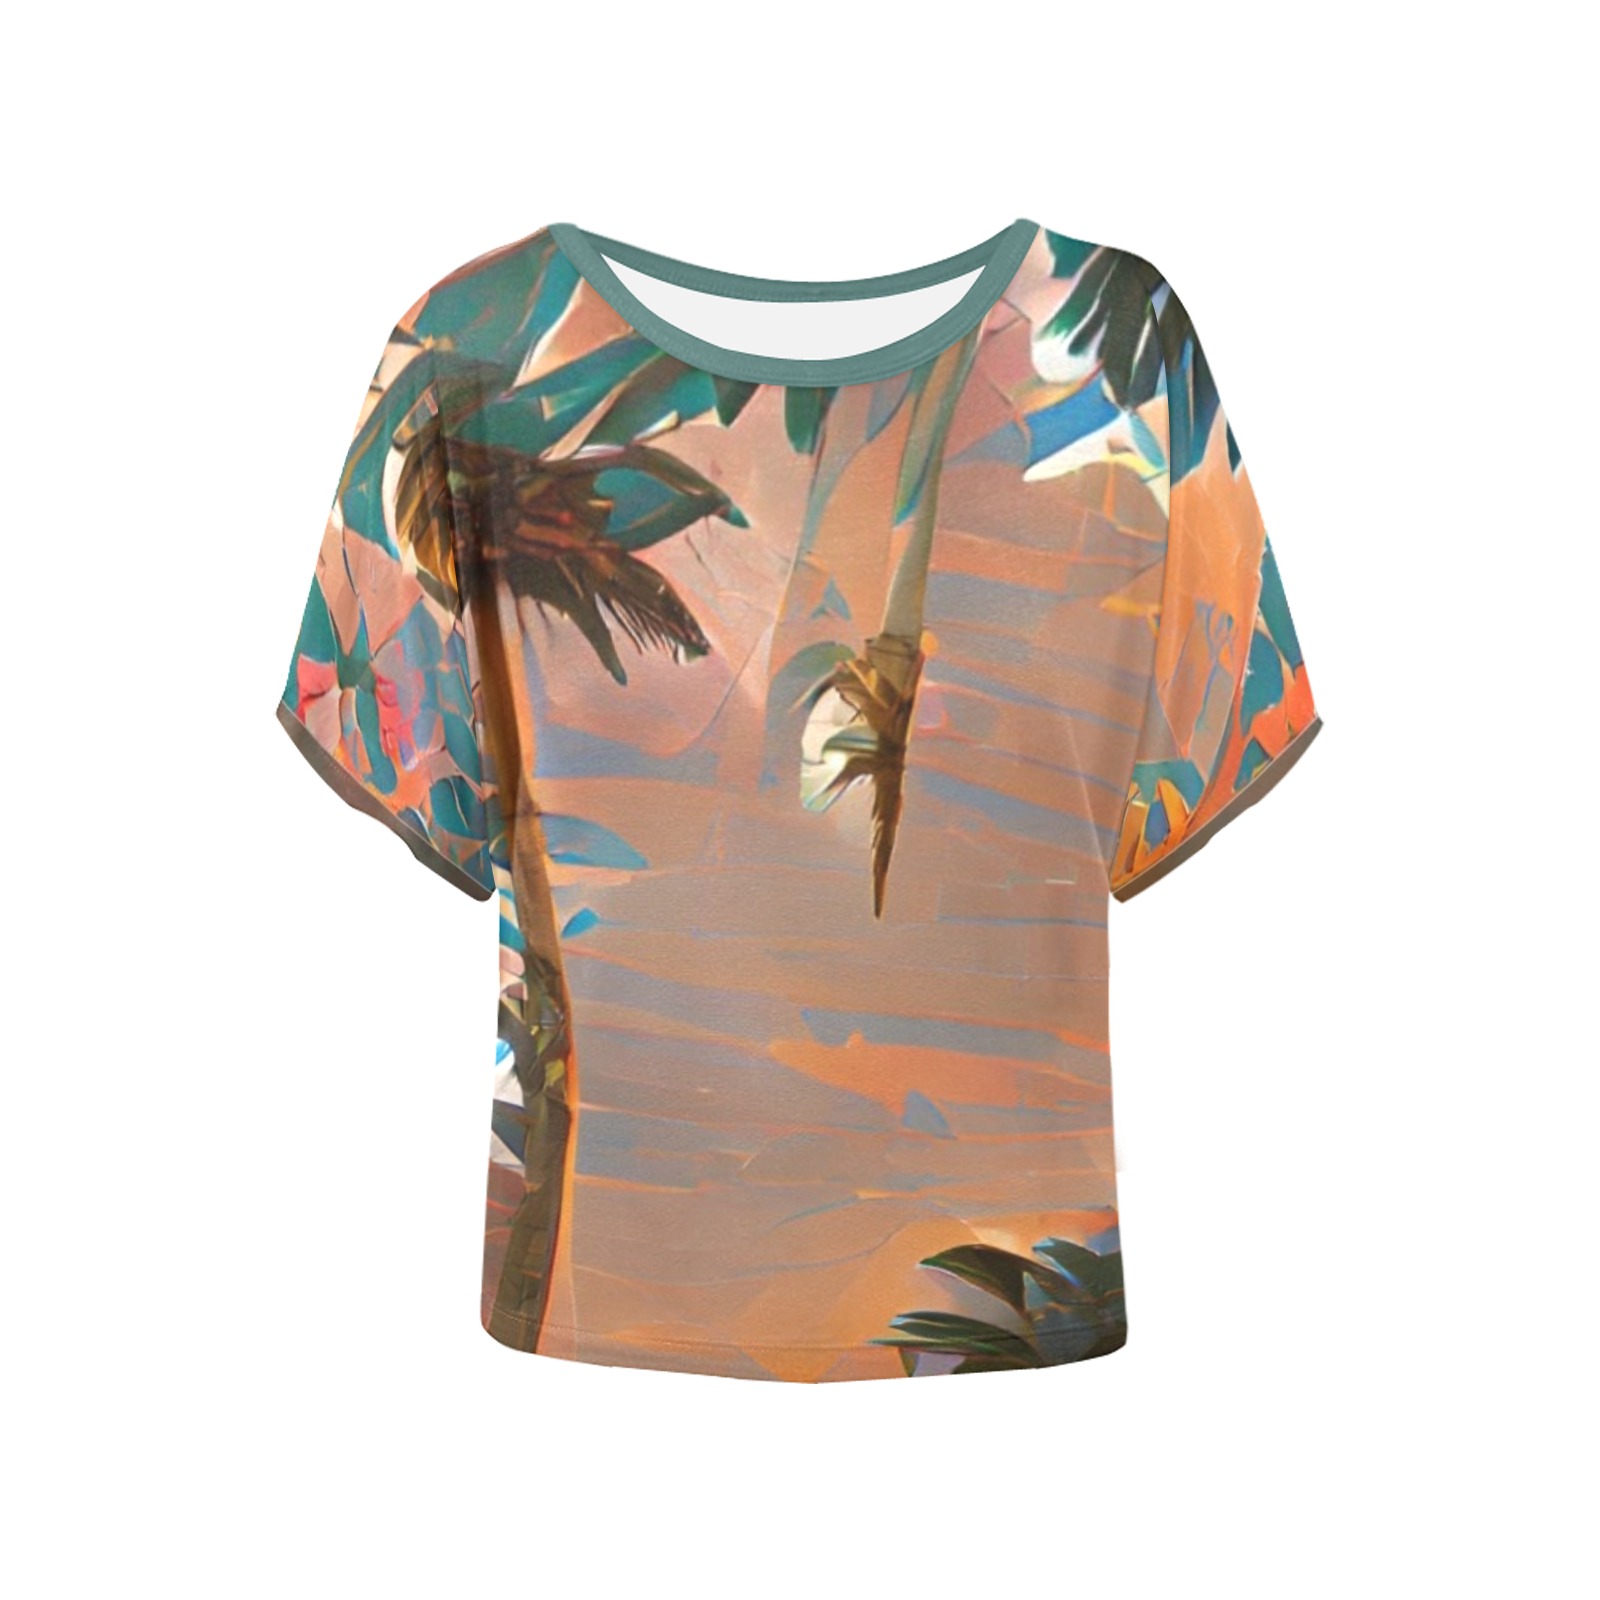 Beach_Vibes_TradingCard Women's Batwing-Sleeved Blouse T shirt (Model T44)